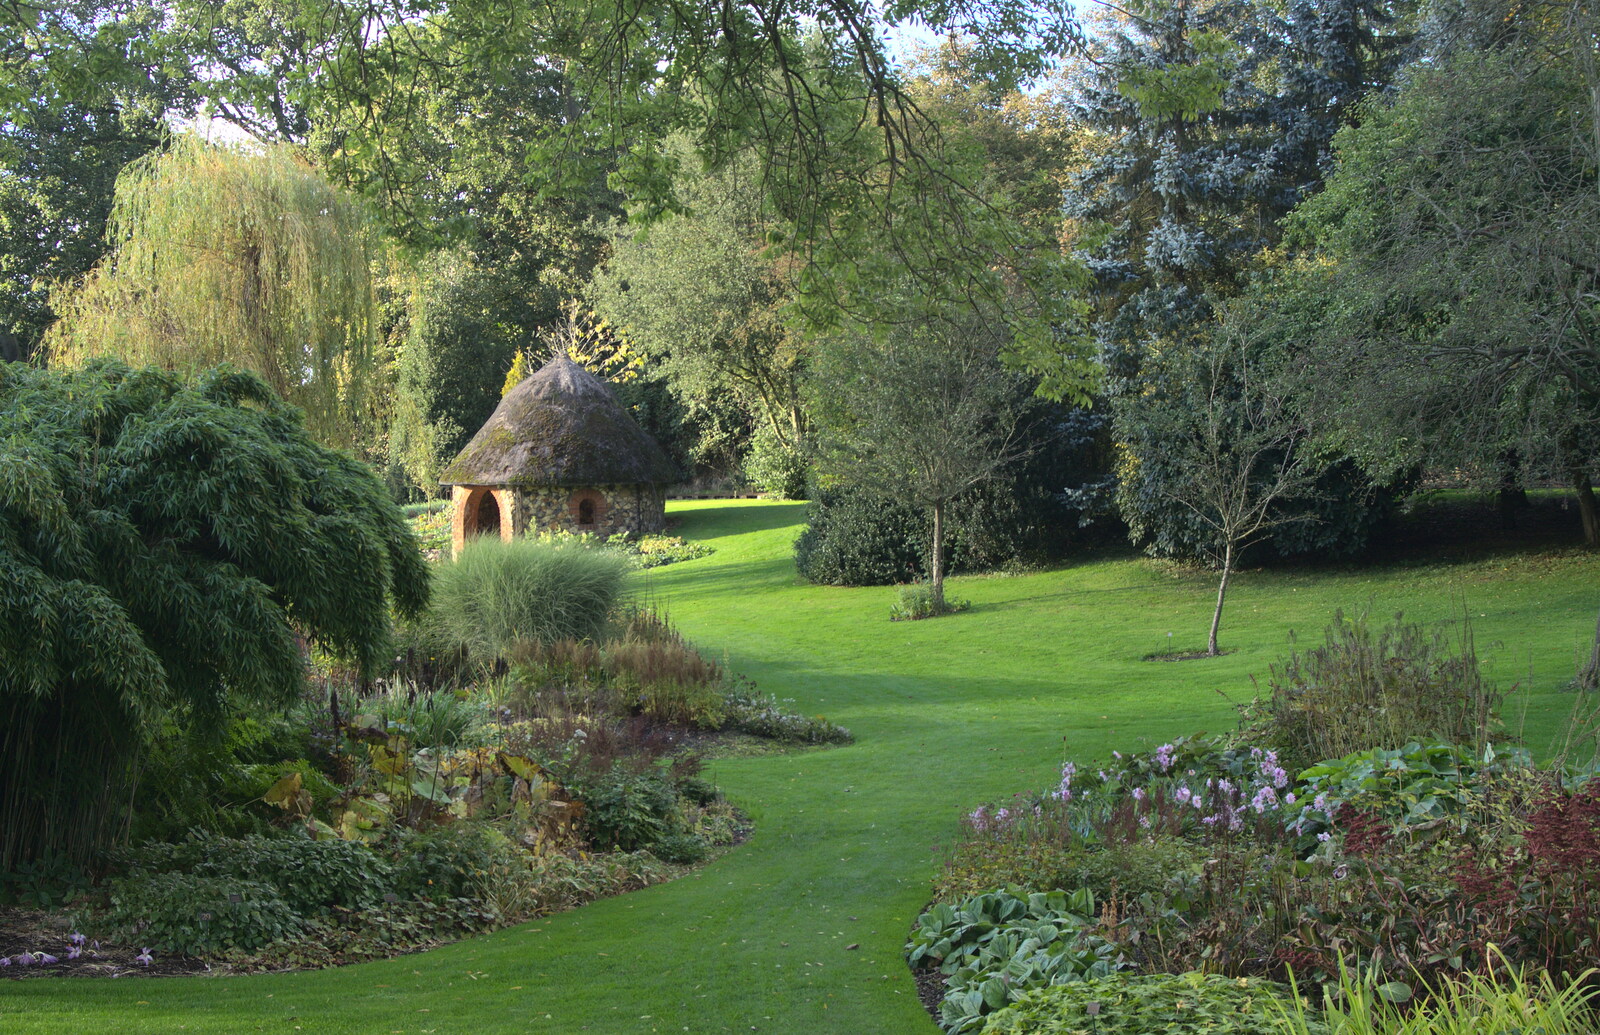 The gardens, and a thatched roundhouse from Alan Bloom's Gardens, Bressingham, Norfolk - 6th October 2012